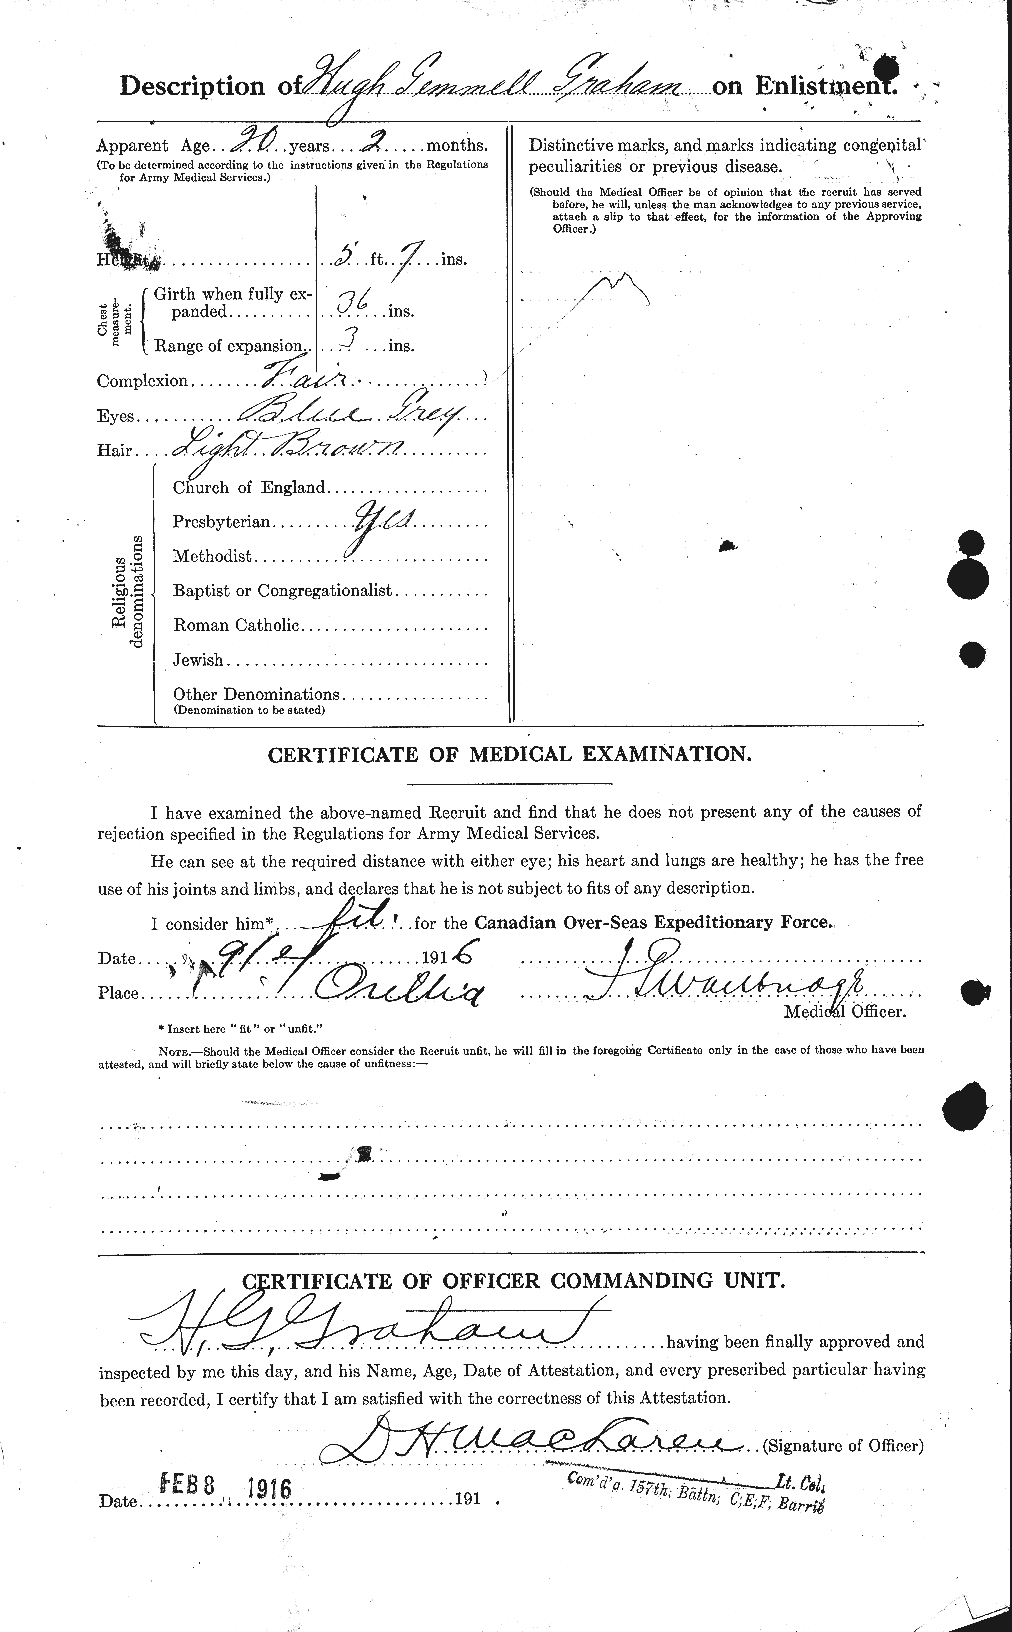 Personnel Records of the First World War - CEF 357761b